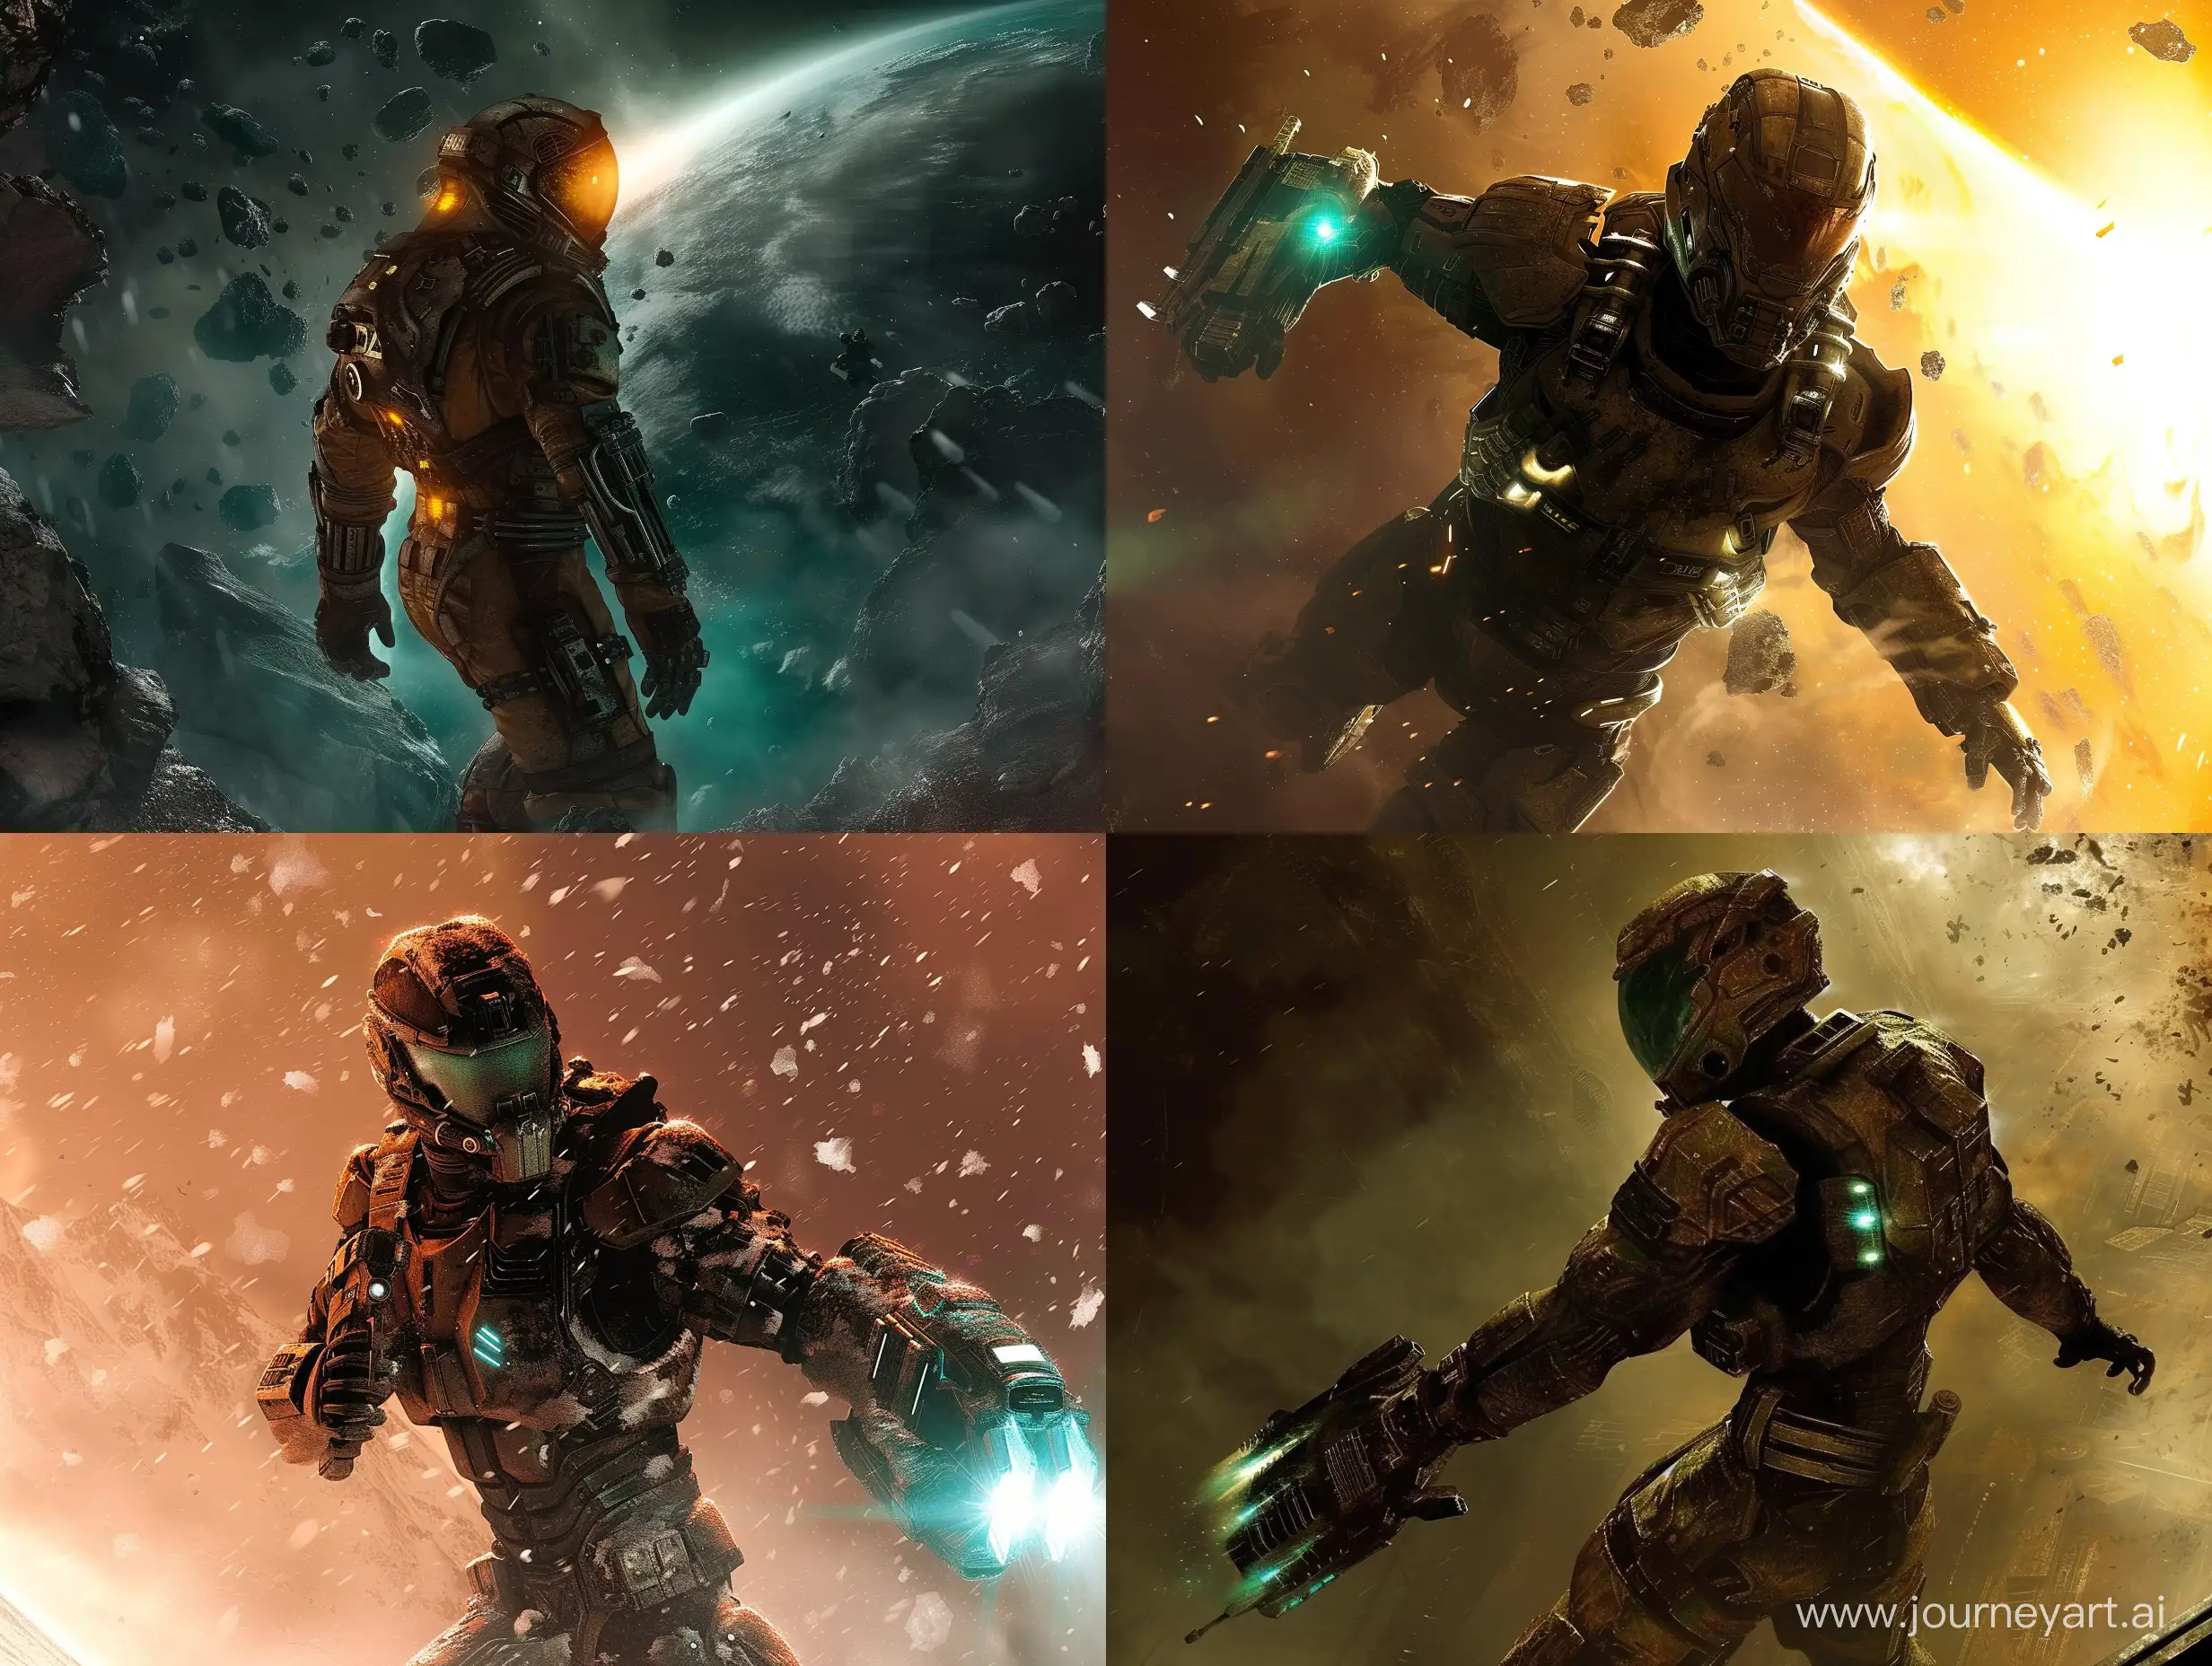 Eerie-Space-Exploration-in-Dead-Space-Video-Game